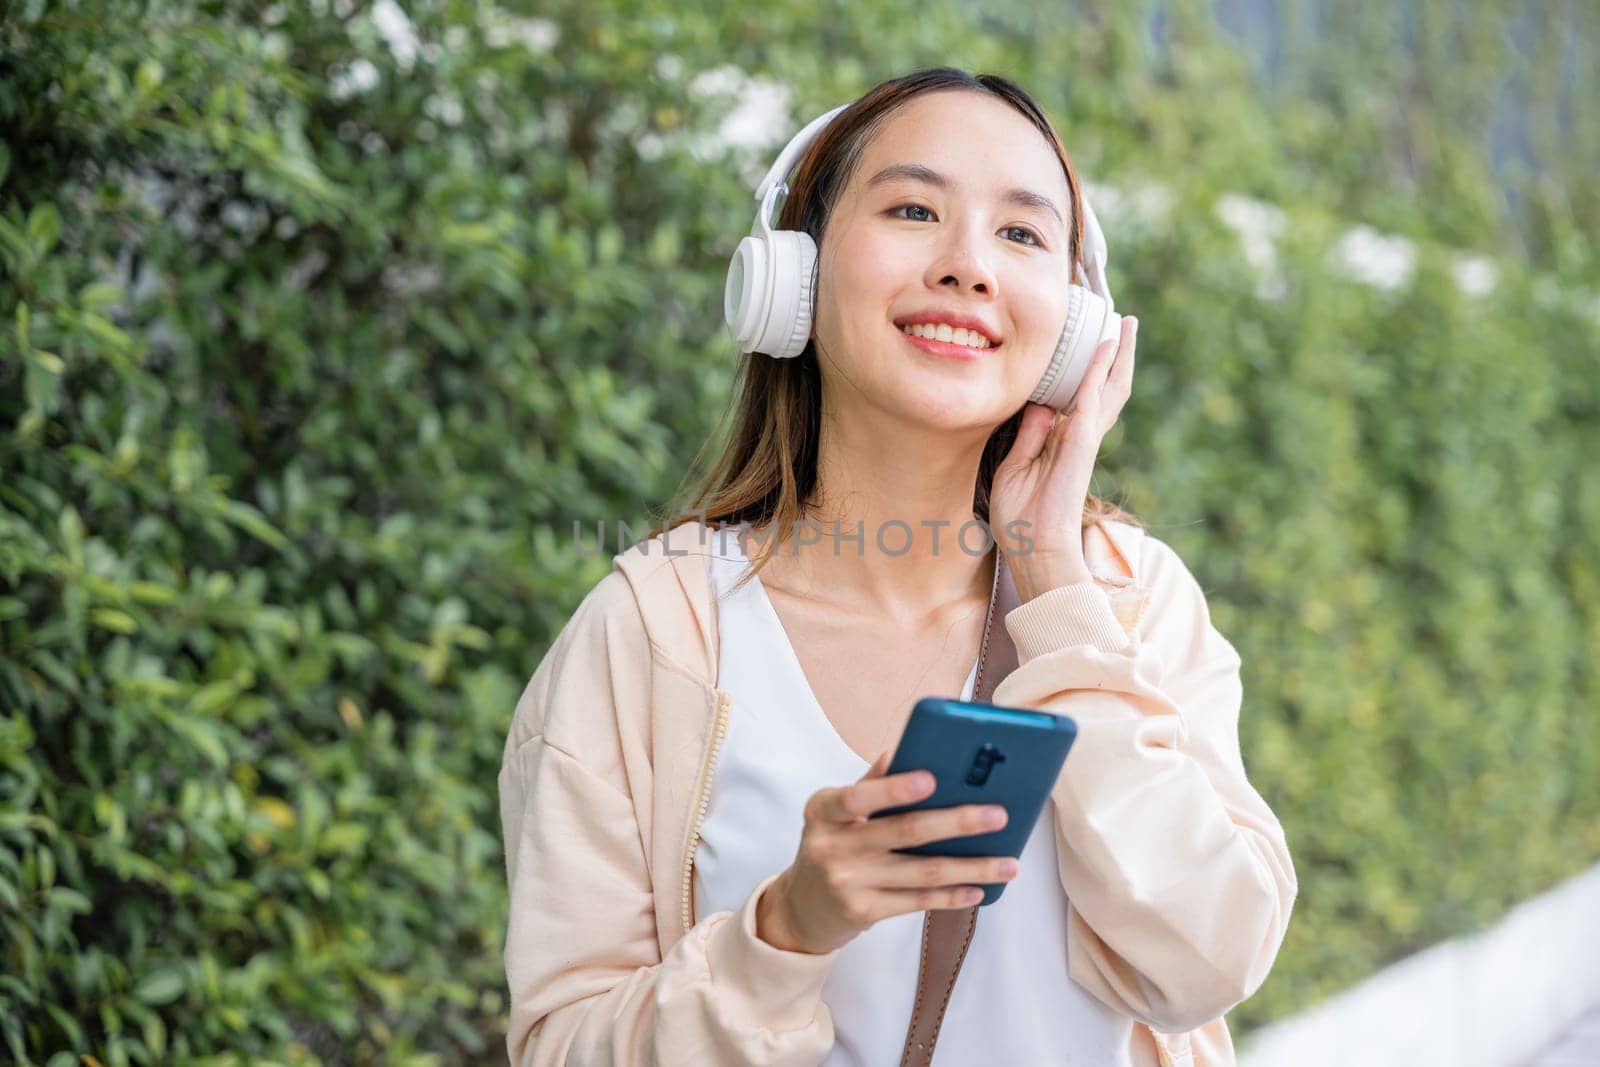 A cheerful young woman dancing with wireless headphones immerses herself in joy of choosing and listening to her favorite energetic music outdoors in the urban city garden. season beauty is evident. by Sorapop